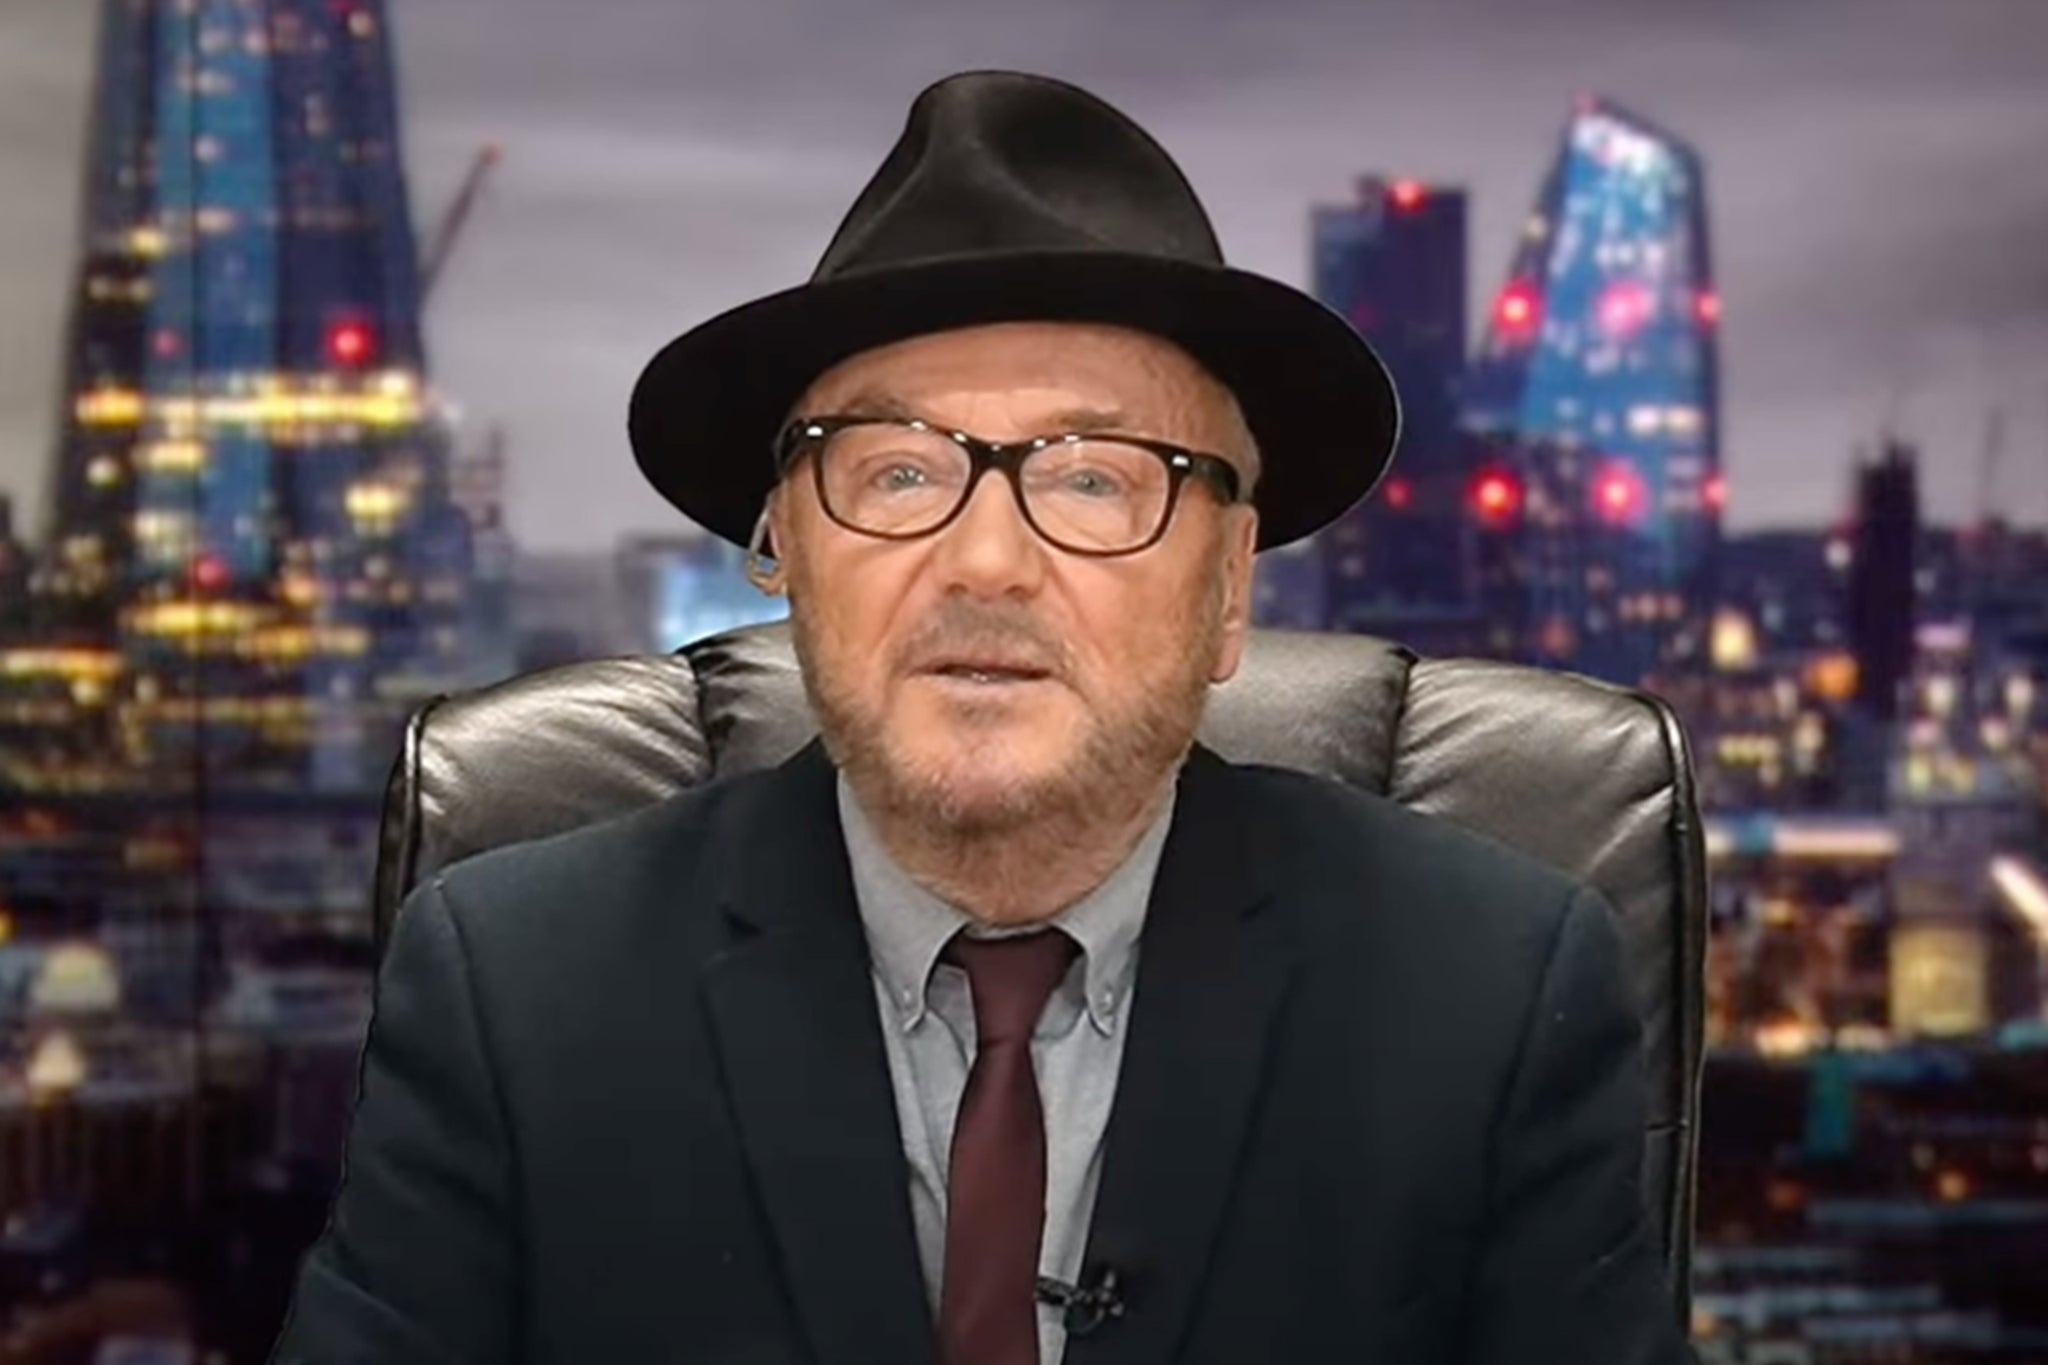 Galloway’s claims were condemned as ‘reckless’ and ‘irresponsible’